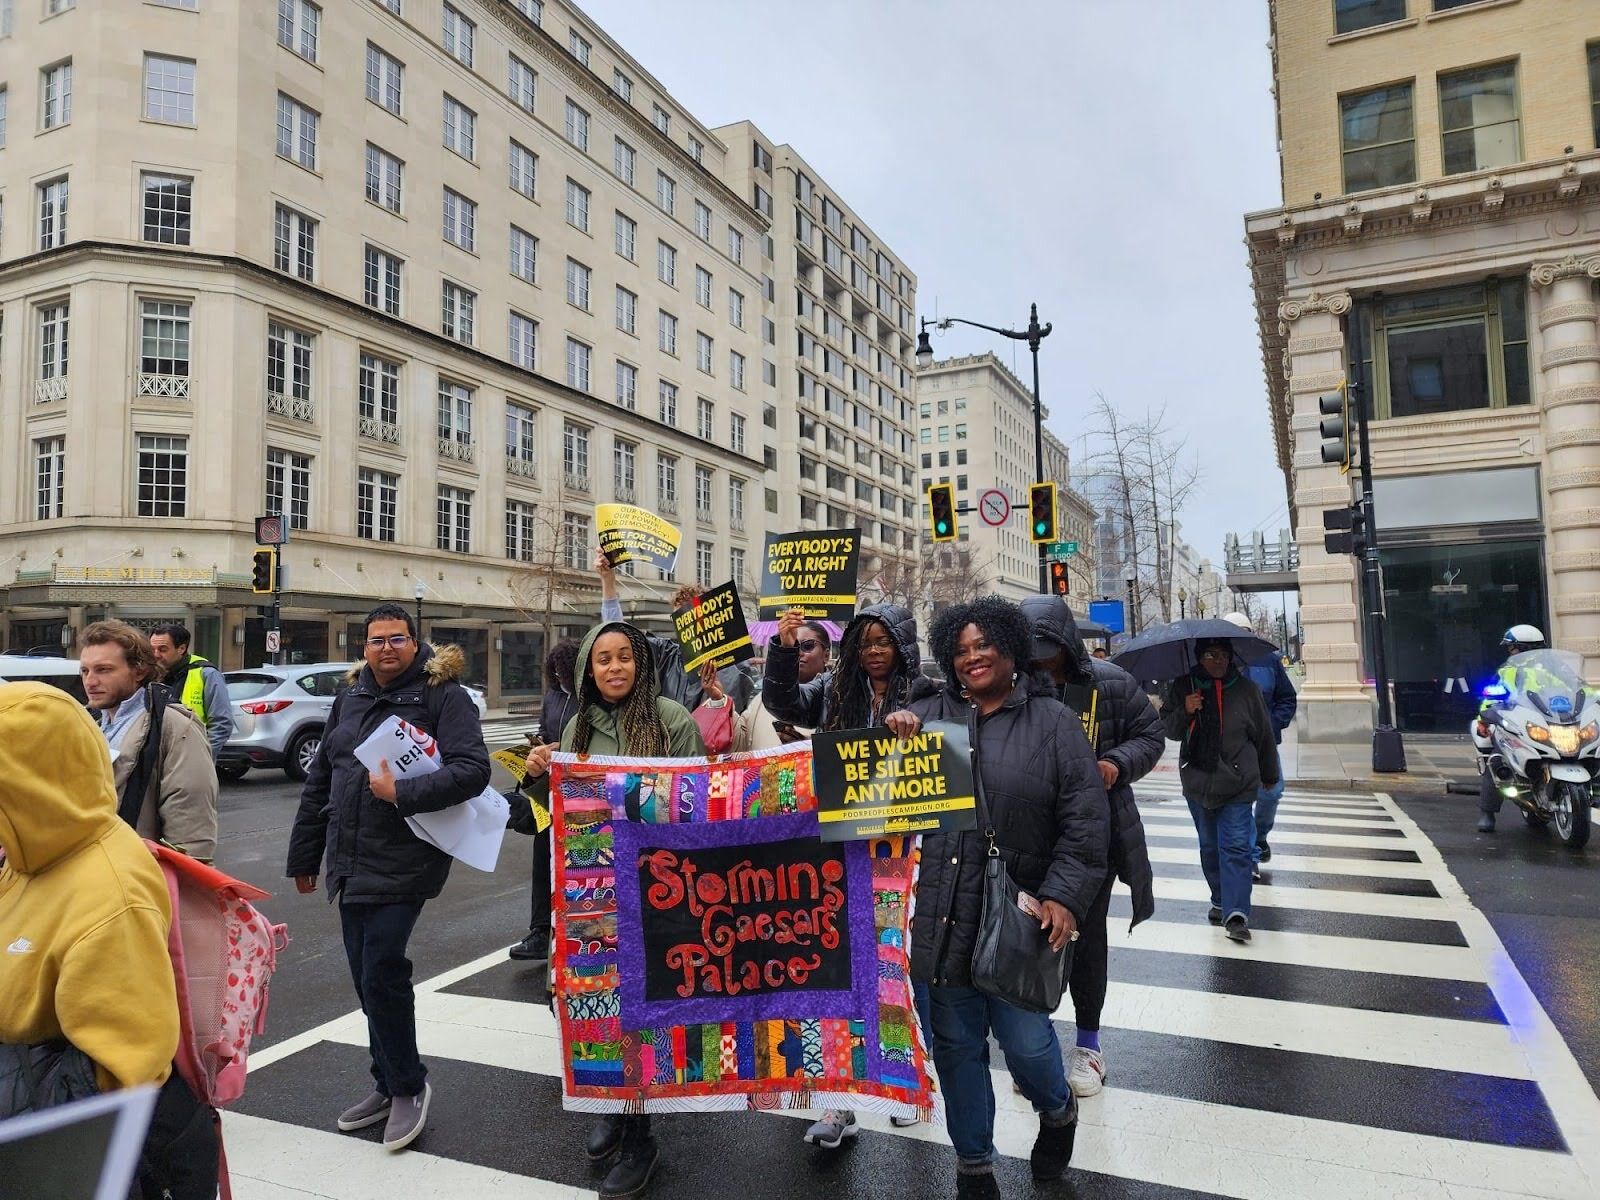 A group of people cross a street in downtown D.C., holding signs.